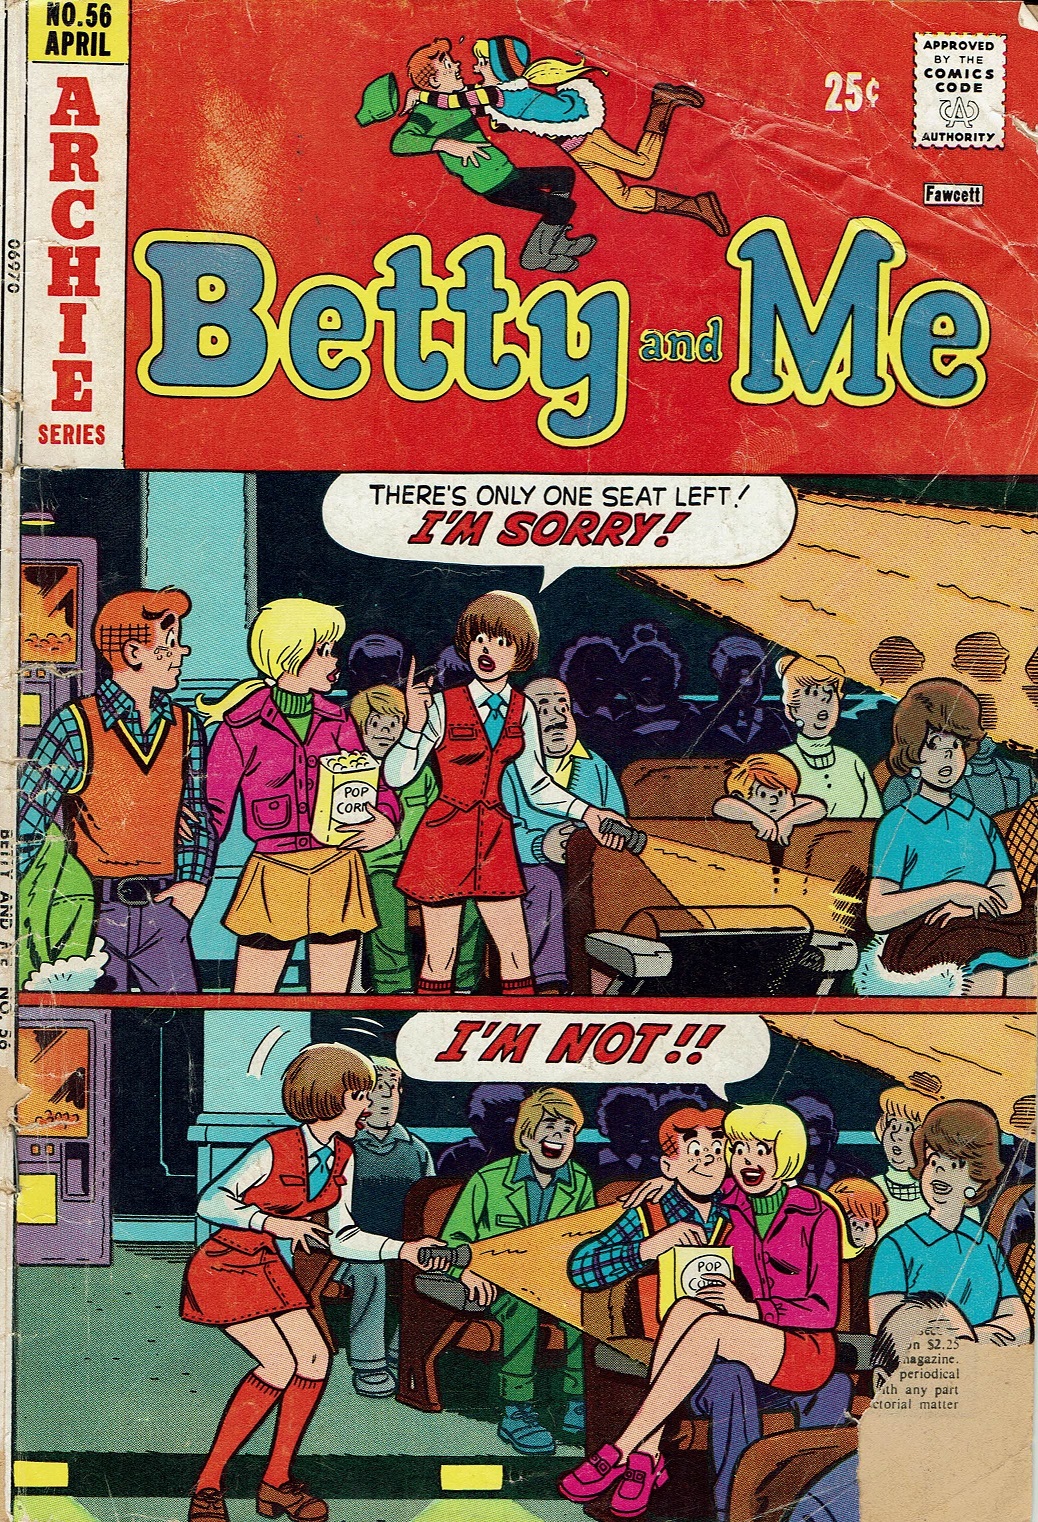 Read online Betty and Me comic -  Issue #56 - 2